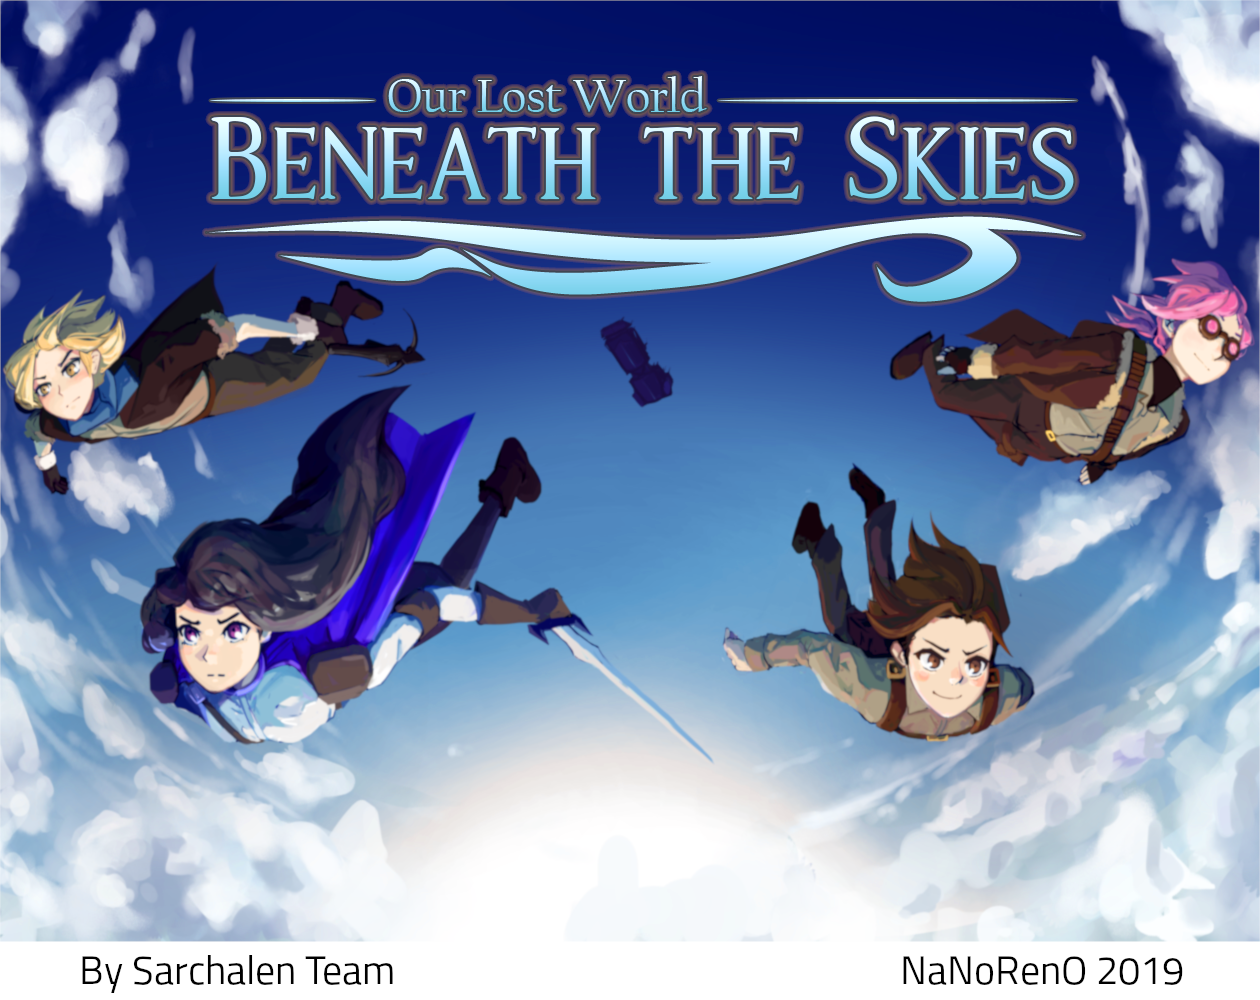 Our Lost World - Beneath the Skies